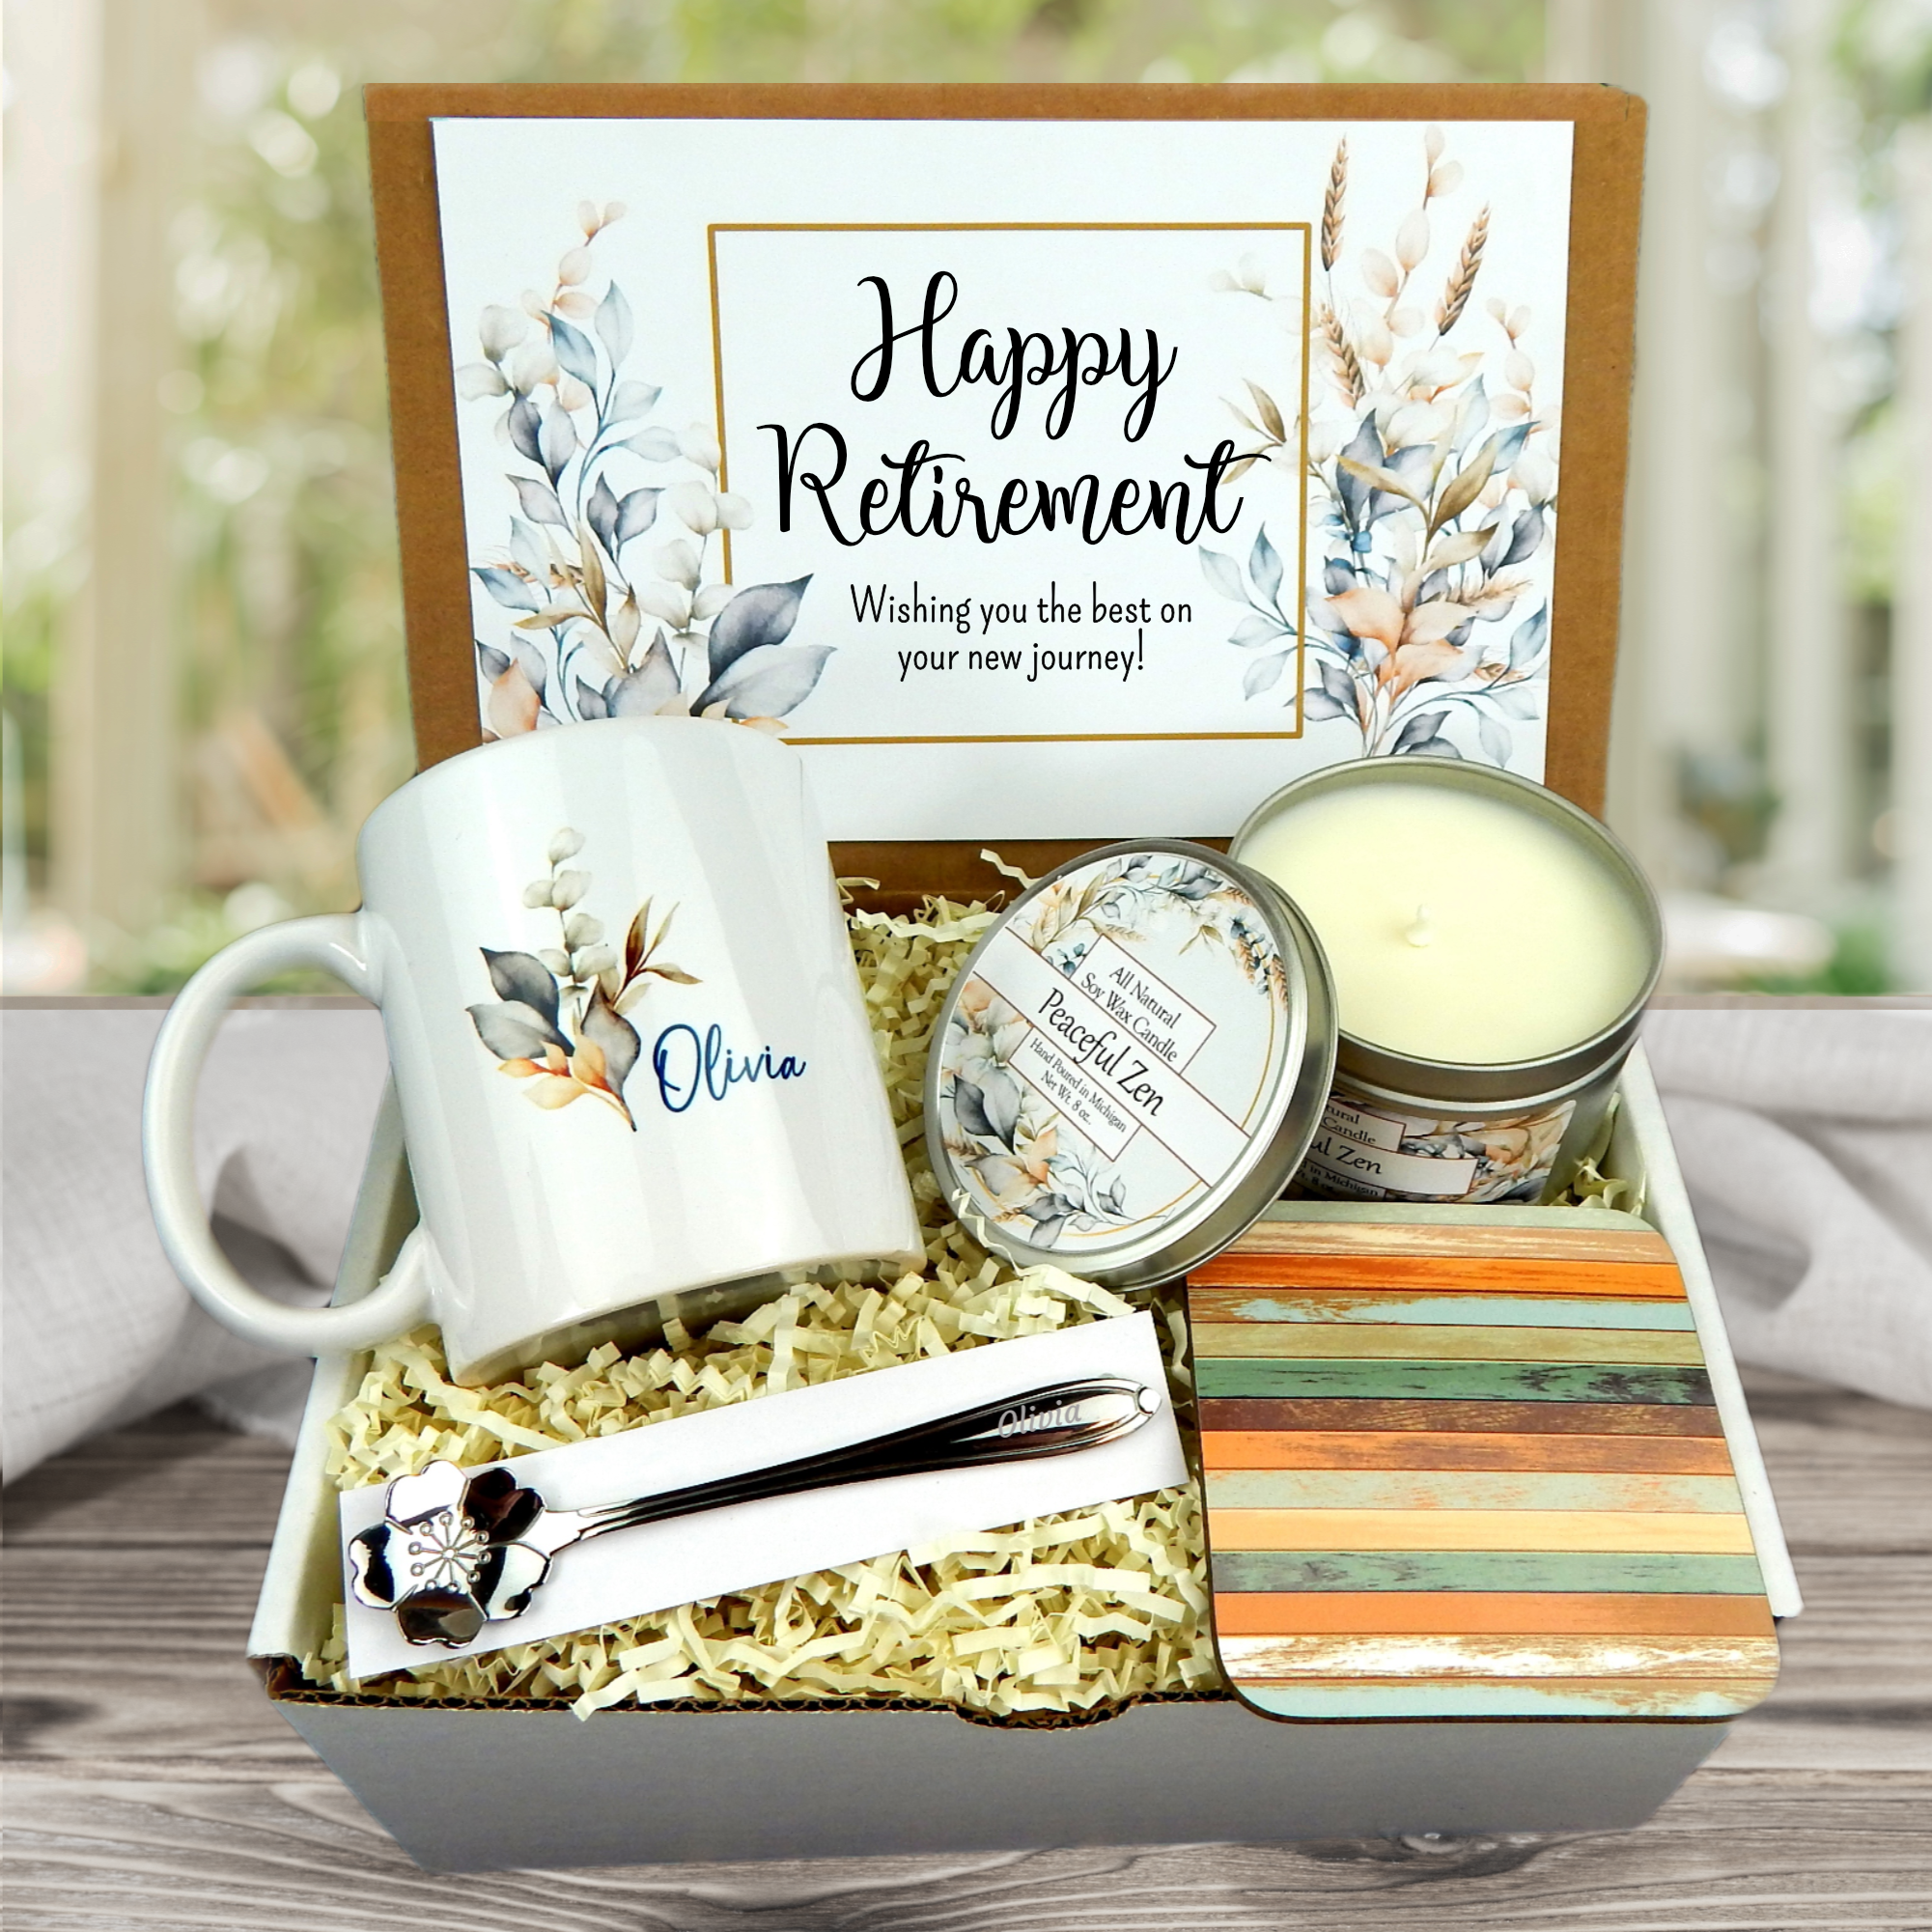 Christmas Gift Baskets Archives - Cupper's Coffee & Tea